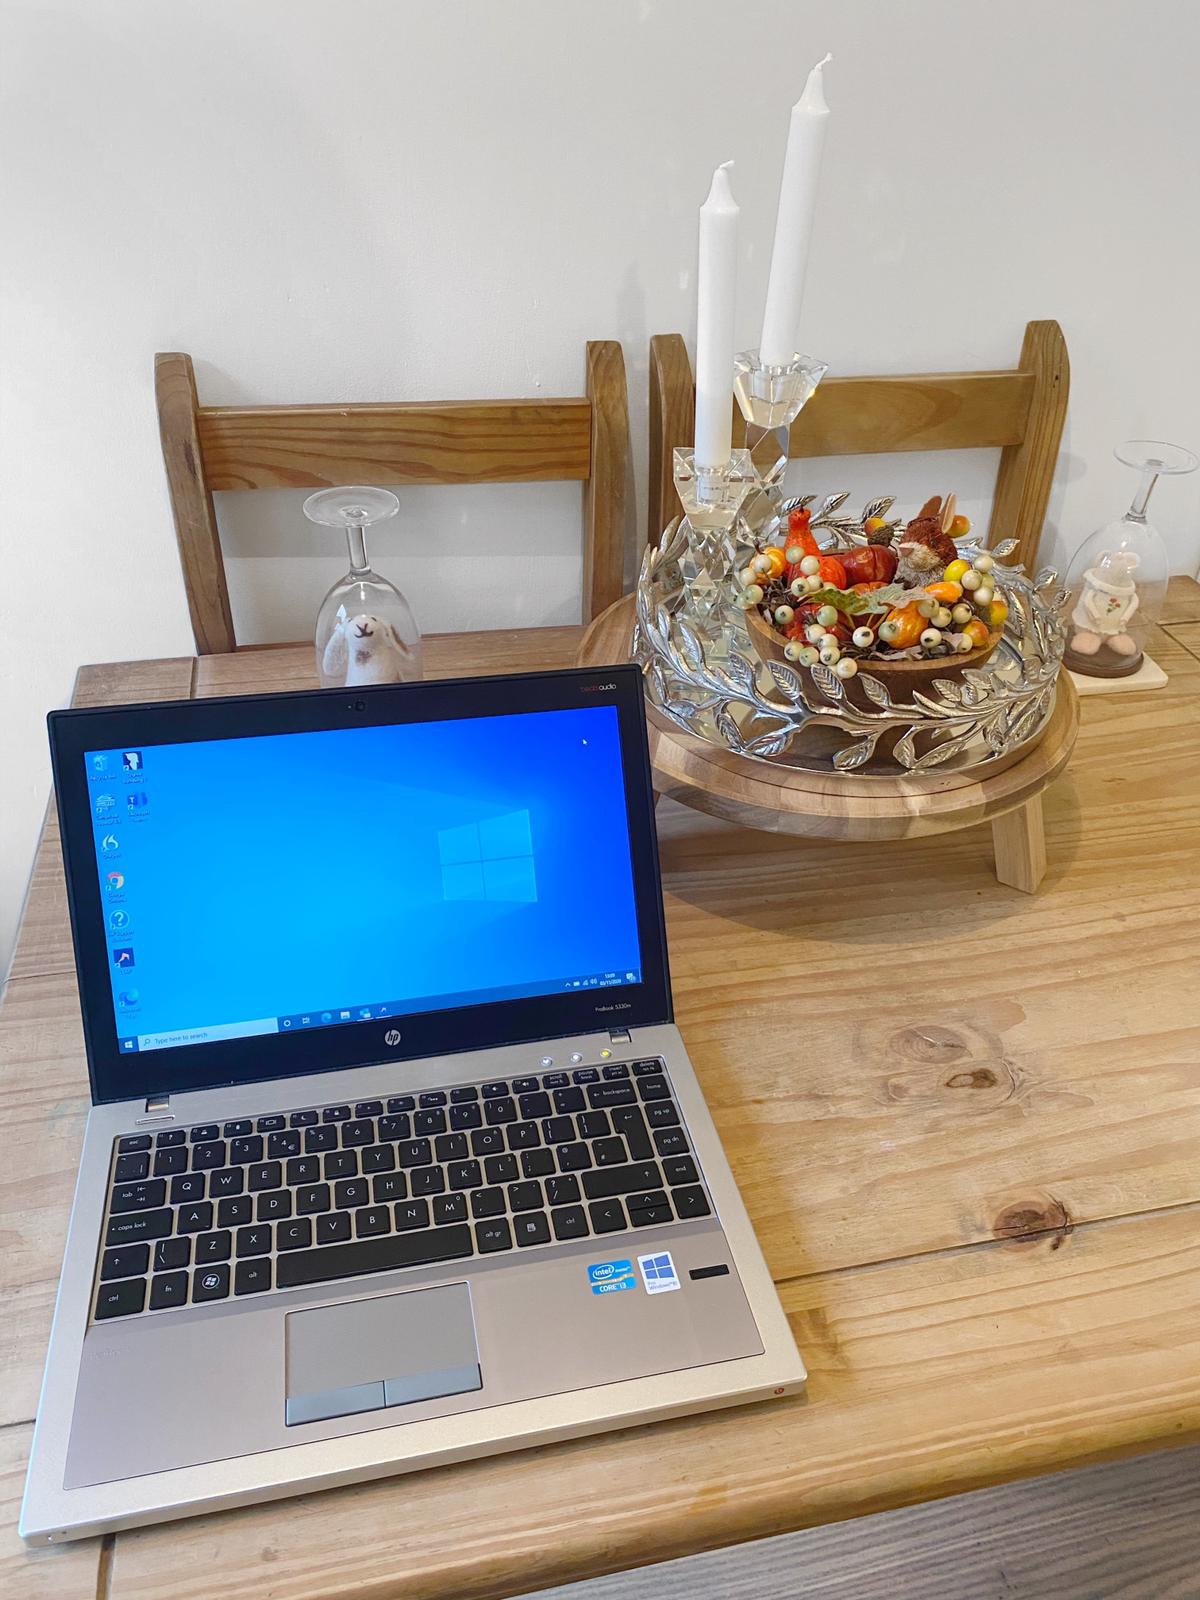 Laptop on table next to decorative centre piece with candles